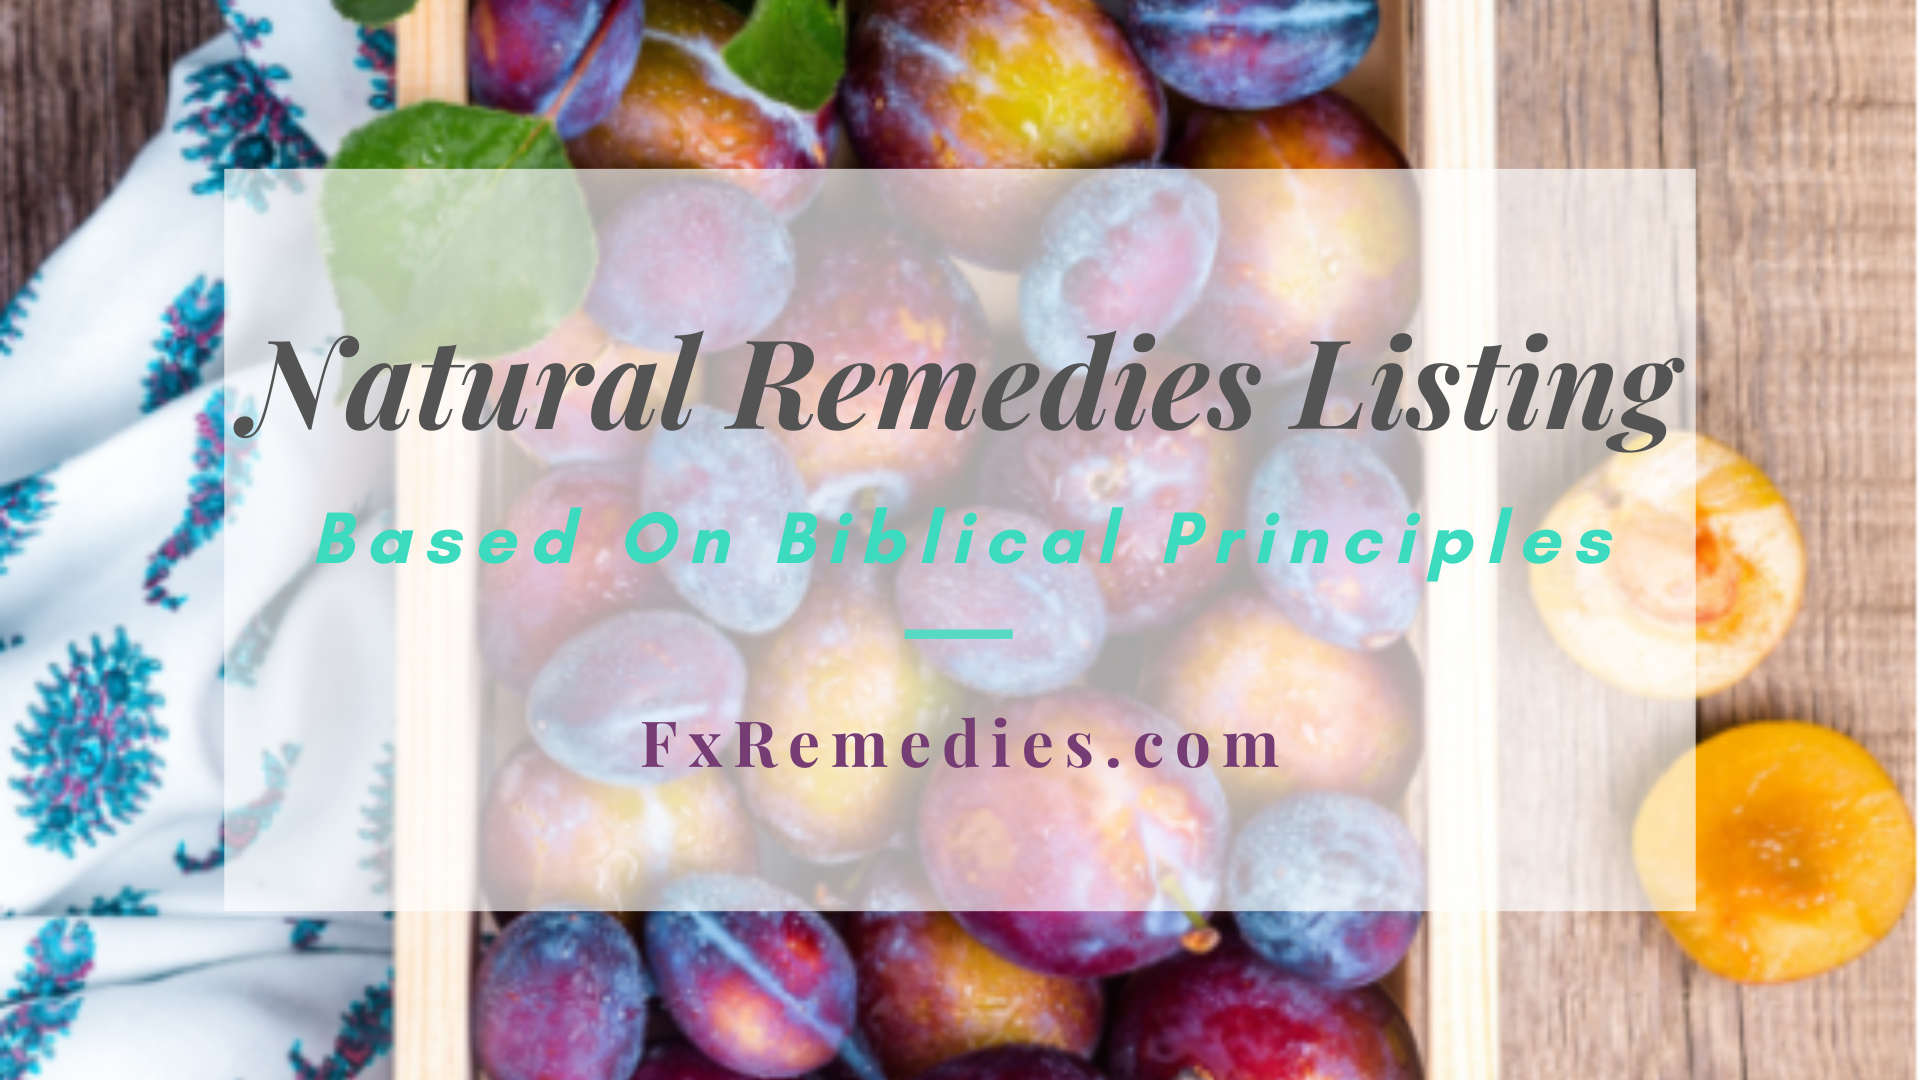 Natural Remedies and the Bible